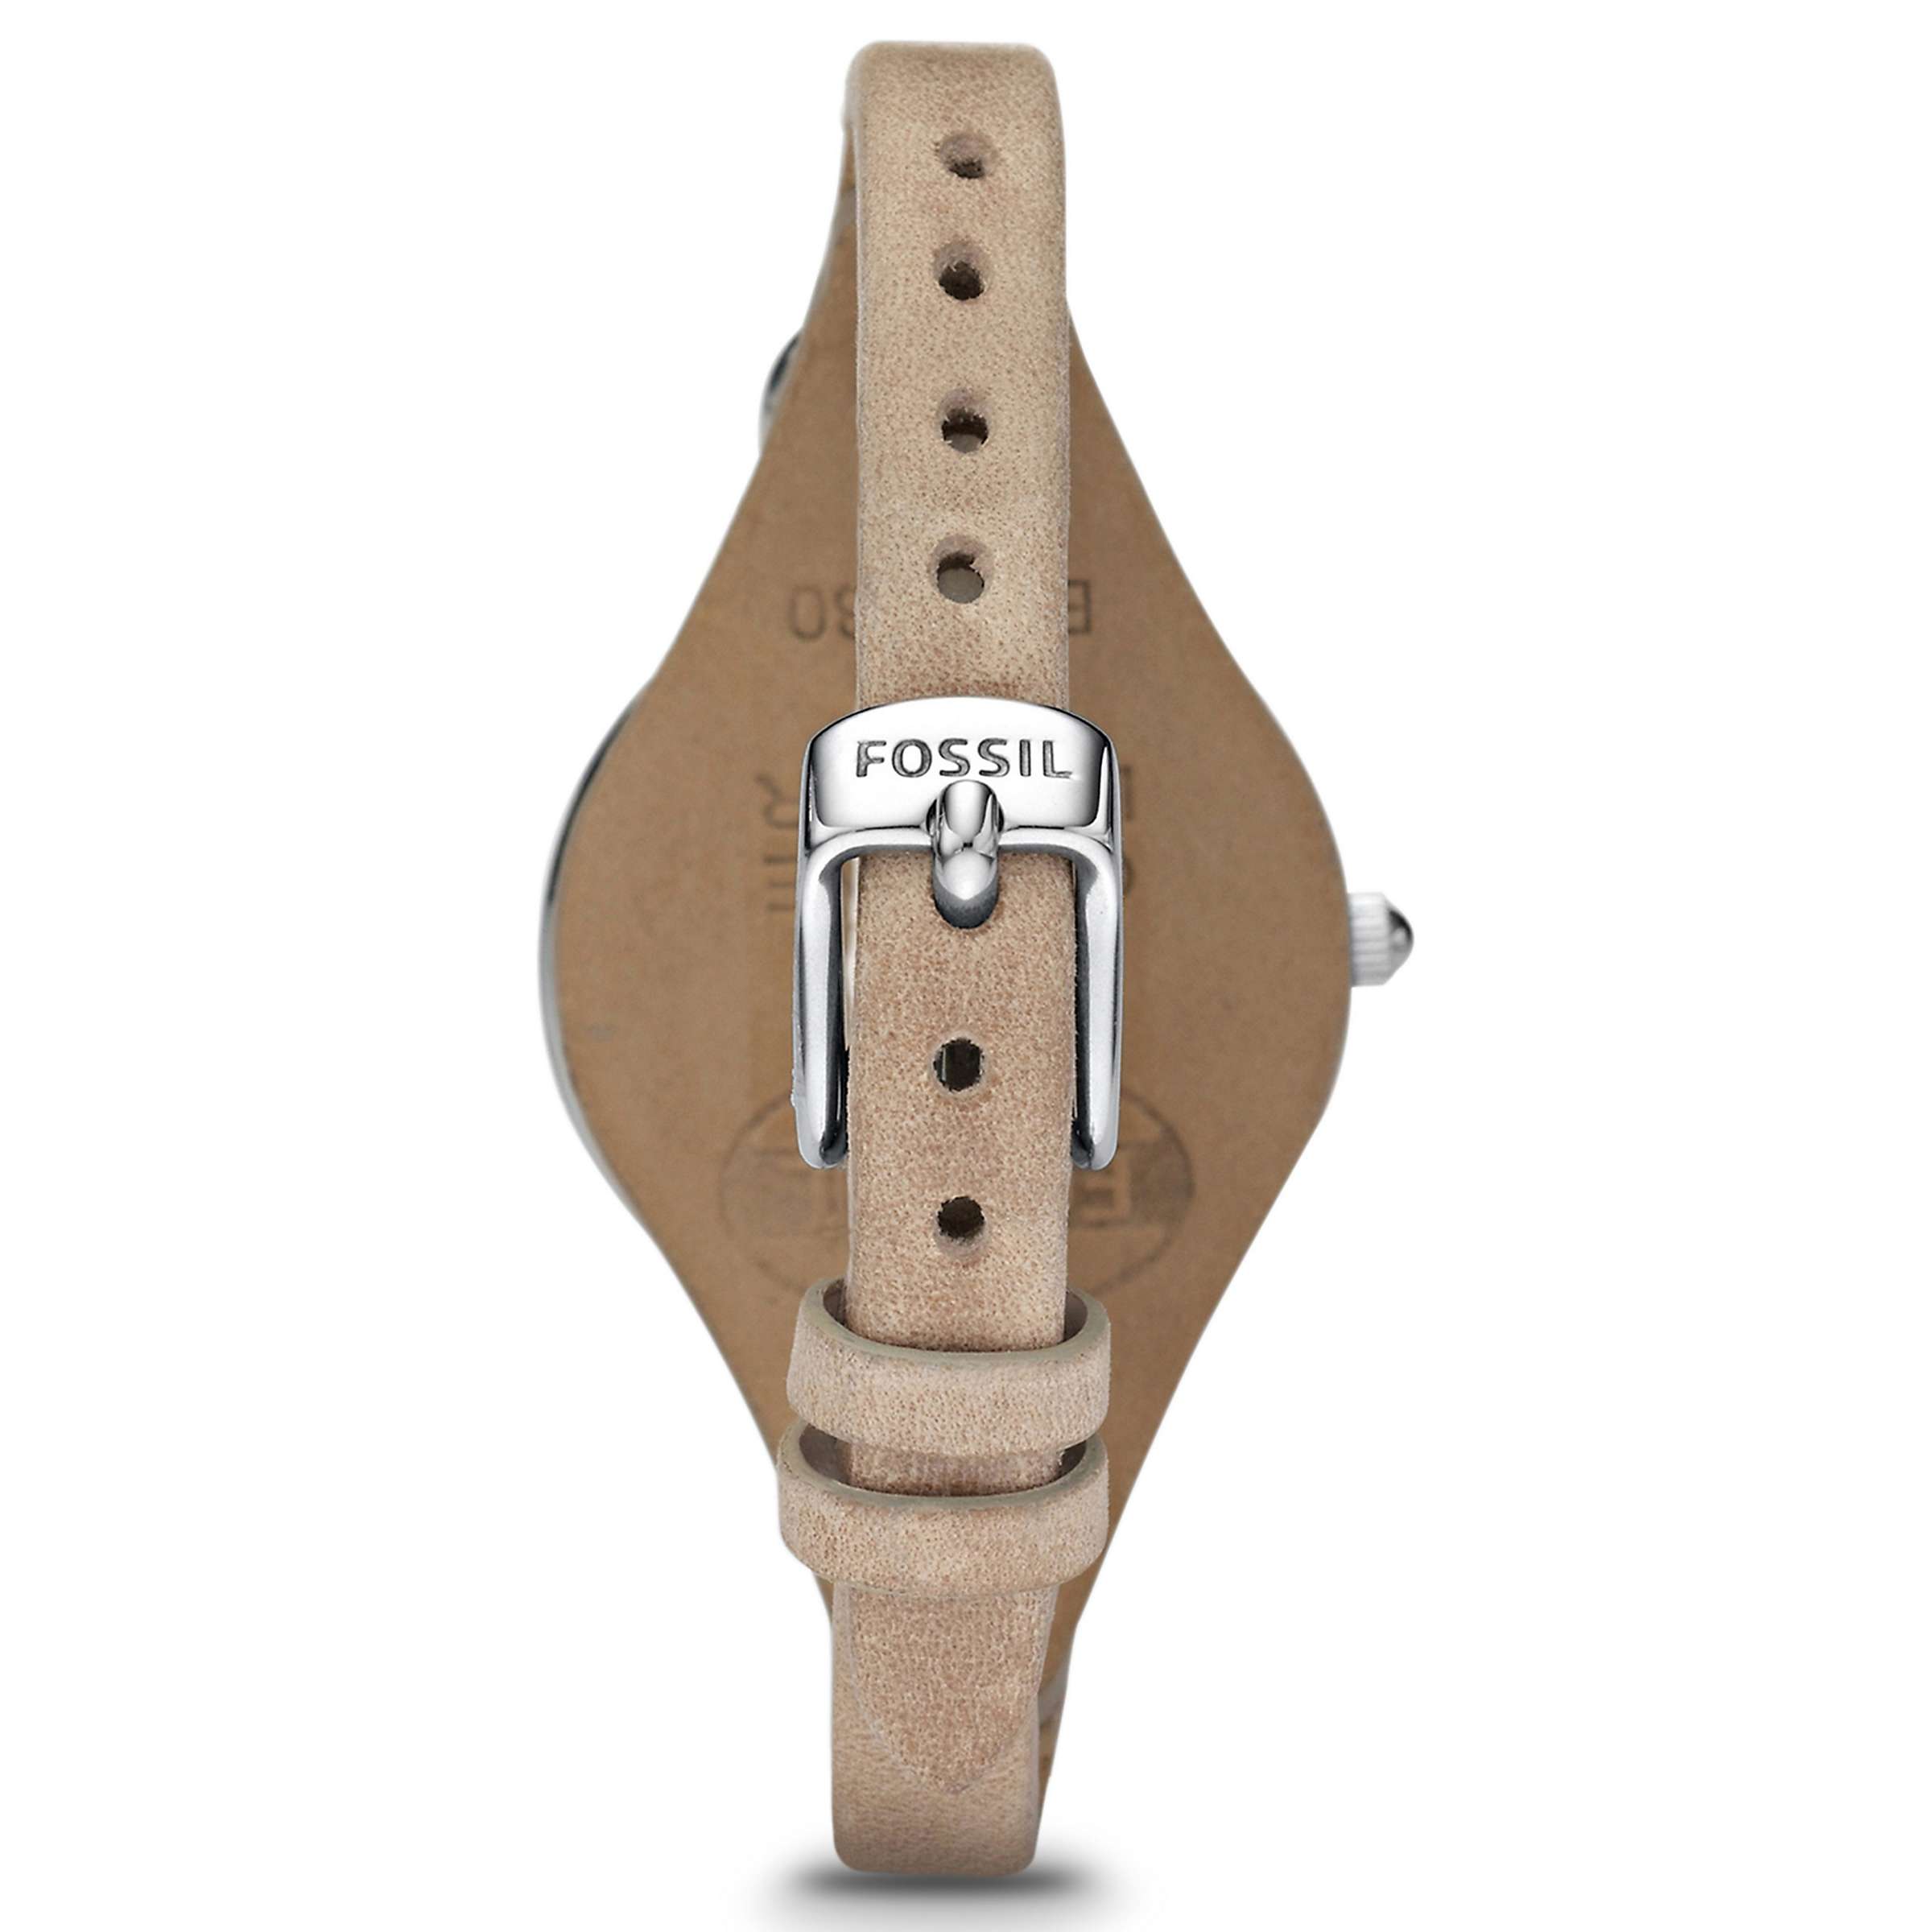 Buy Fossil ES2830 Georgia Women's Leather Strap Watch, Sand Online at johnlewis.com